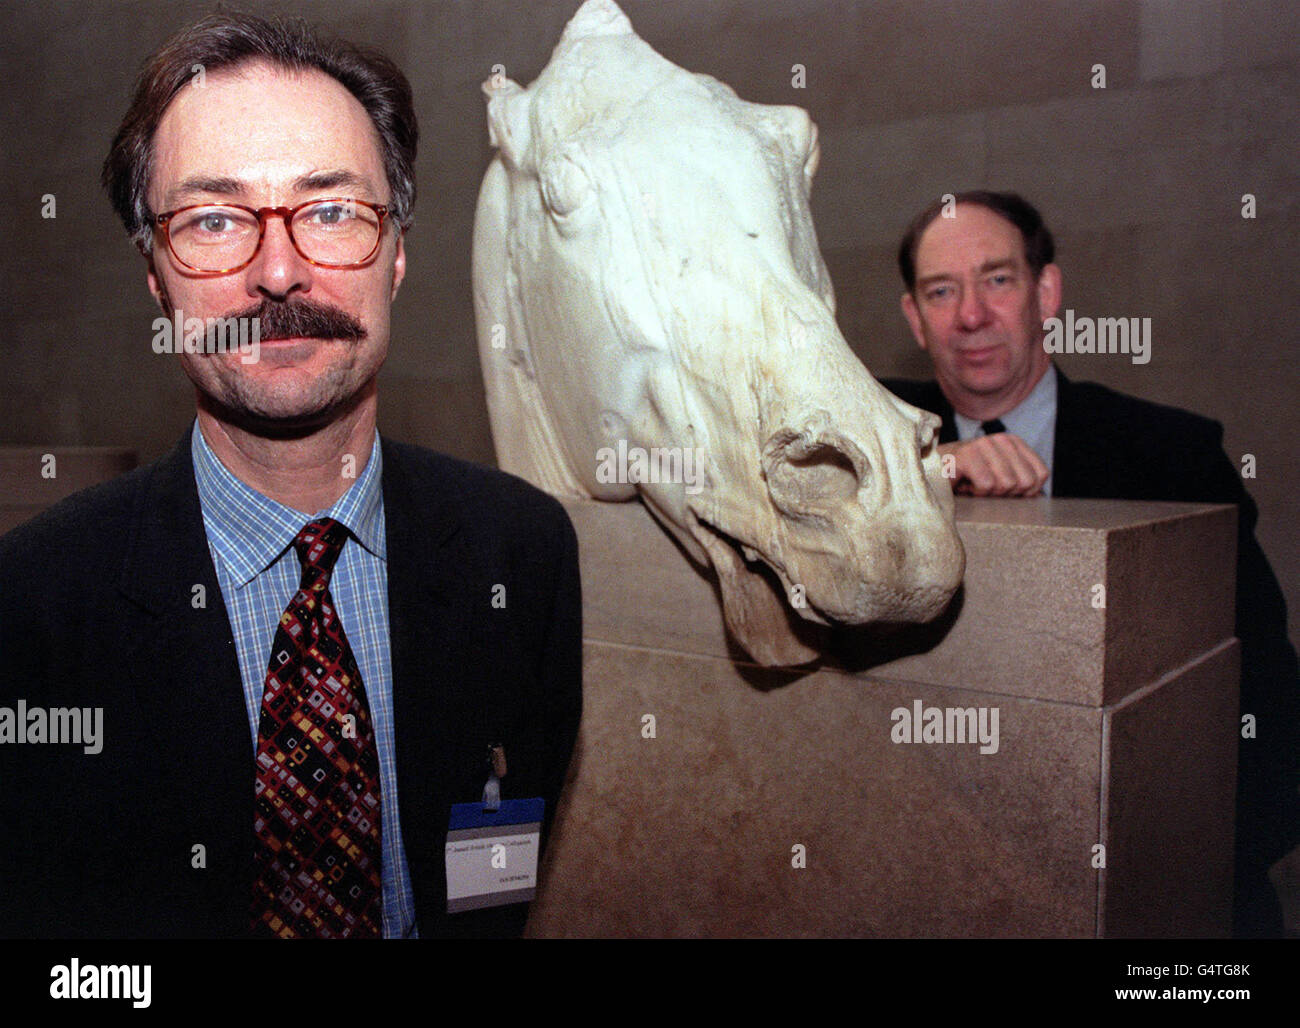 Dr Ian Jenkins (left) and British Museum Director Dr Robert Anderson with one of the Parthenon Sculptures, also known as the Elgin Marbles at the British Museum in London. The museum is hosting a two-day gathering at the School of Oriental and African Studies. Stock Photo